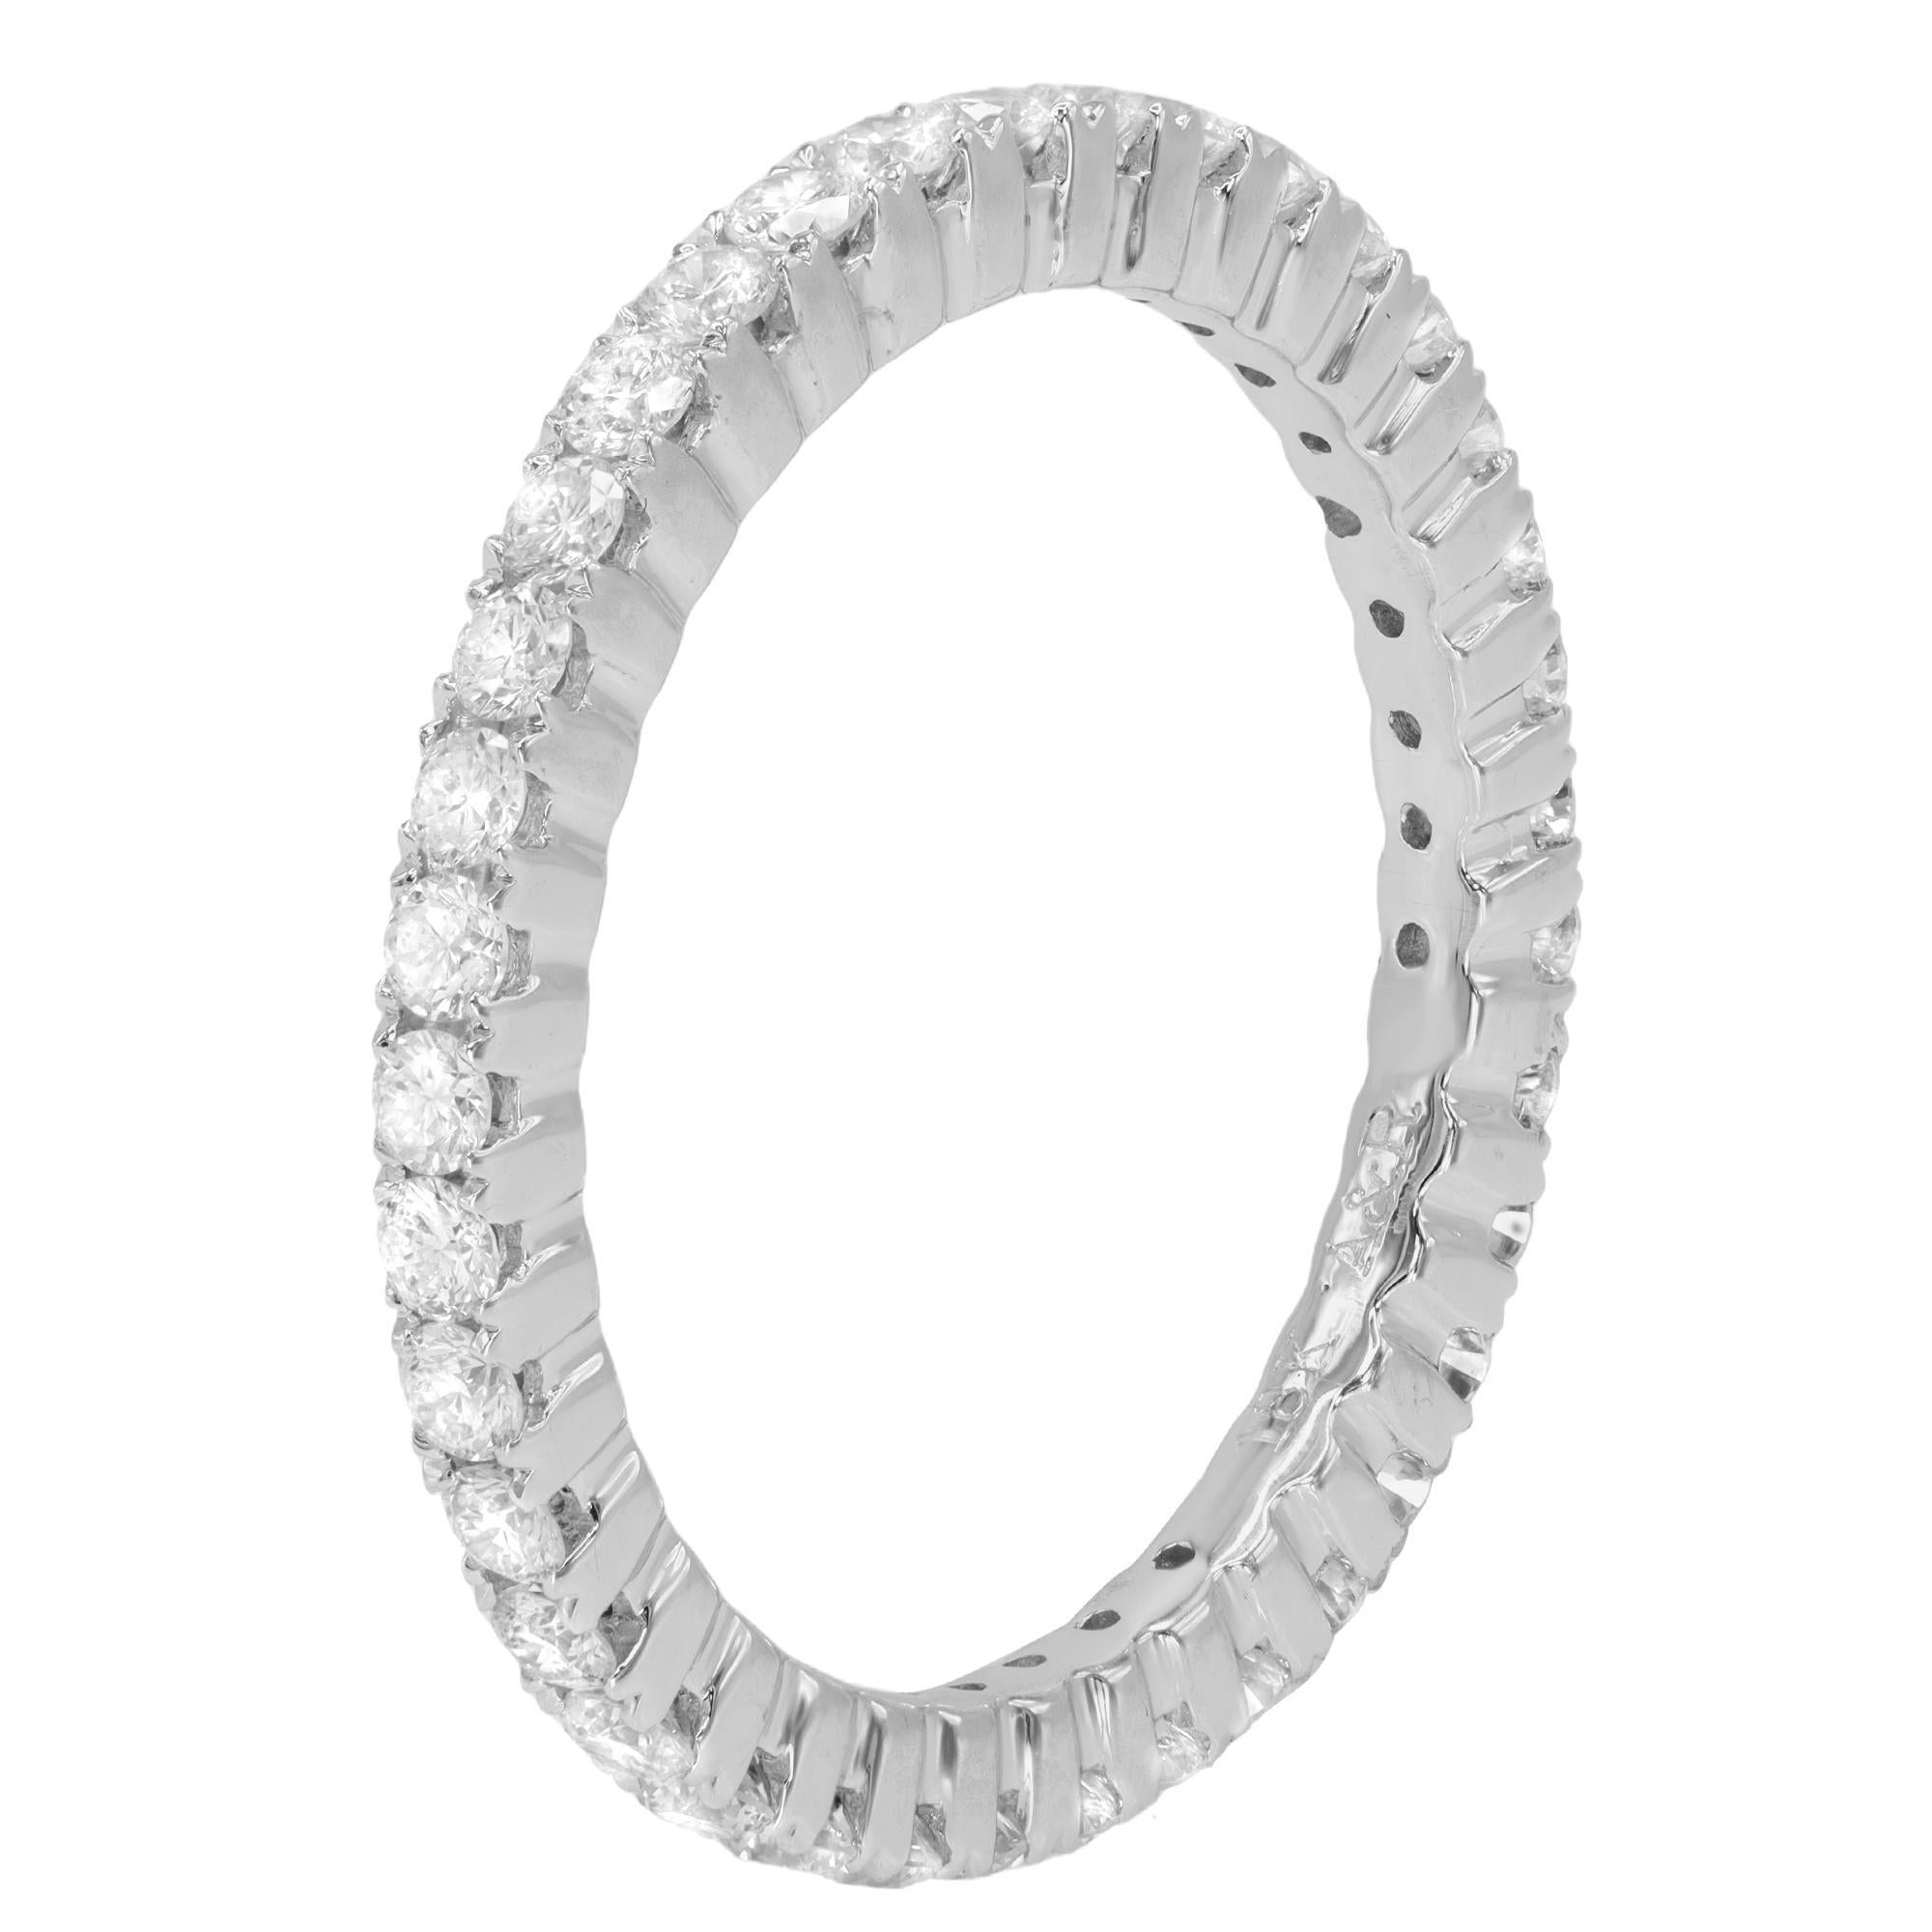 Brilliant in every way, this diamond eternity wedding band ring features round cut, natural diamonds in a pave setting. Set with a total of 0.93ct of round cut diamonds. Diamond color G-H and VS-SI clarity. Width: 1.80mm. Ring size 7. Comes with a